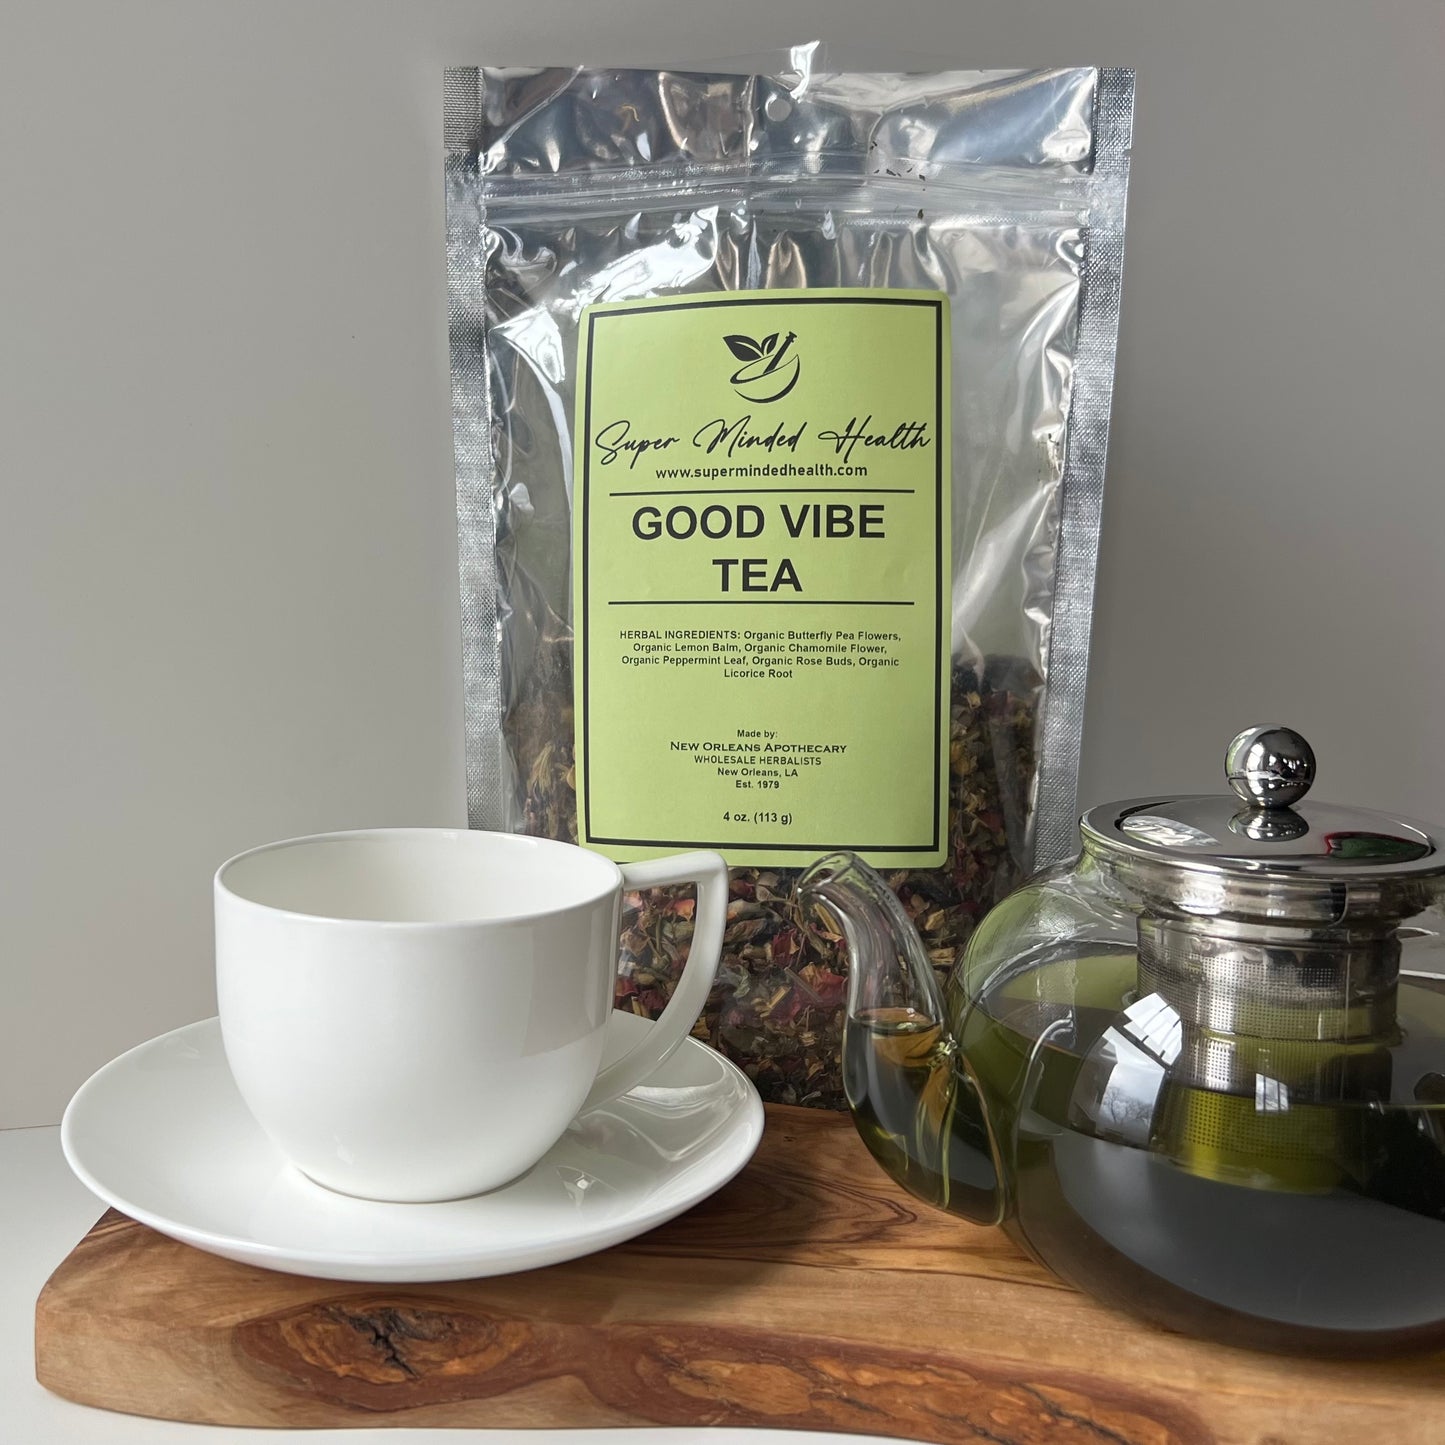 Good Vibe Tea (32 Servings) Loose Organic Herbal Tea Revitalize Butterfly Pea Blend Simply Delicious!